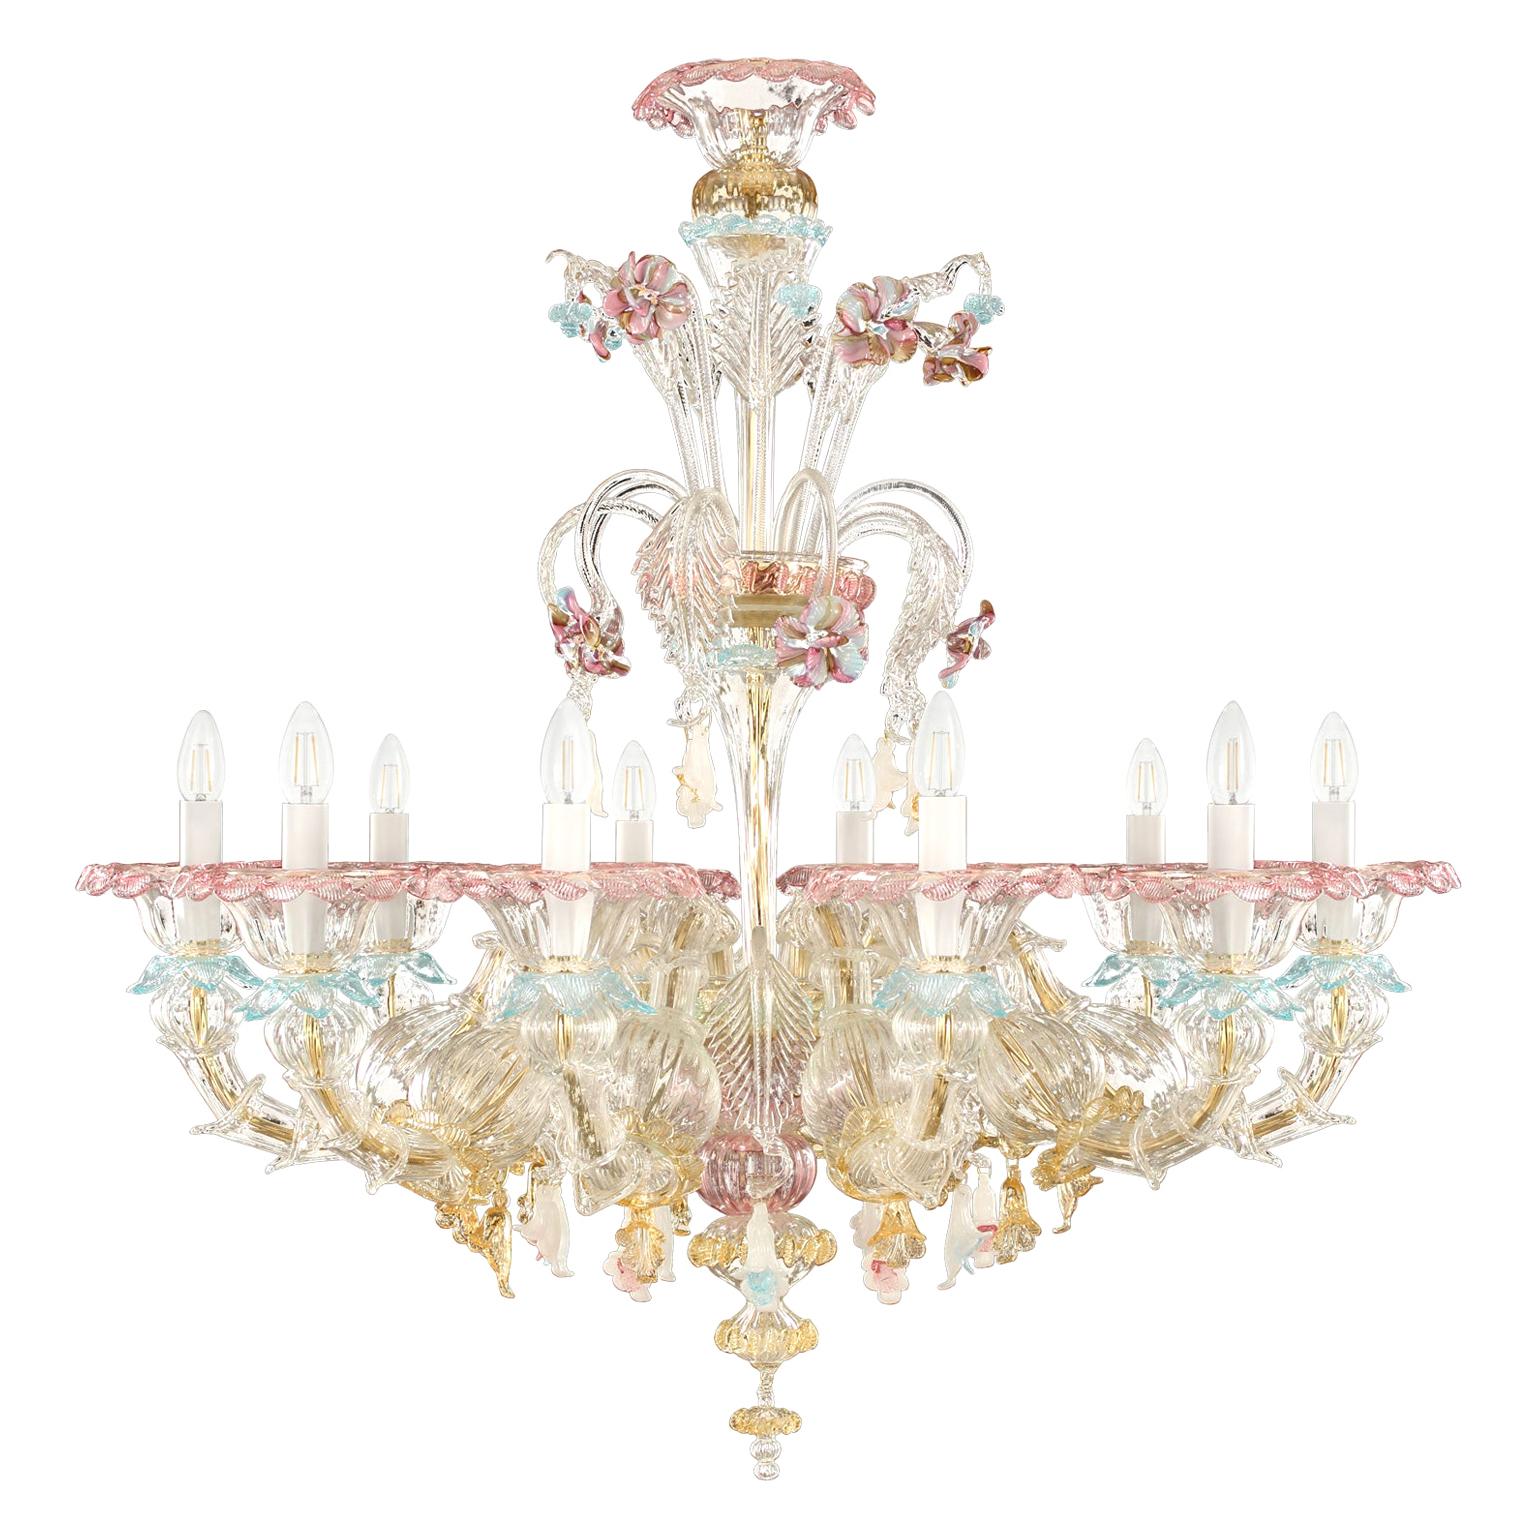 Artistic Murano Rezzonico Chandelier 10 Arms Glass Multi-Color by Multiforme For Sale